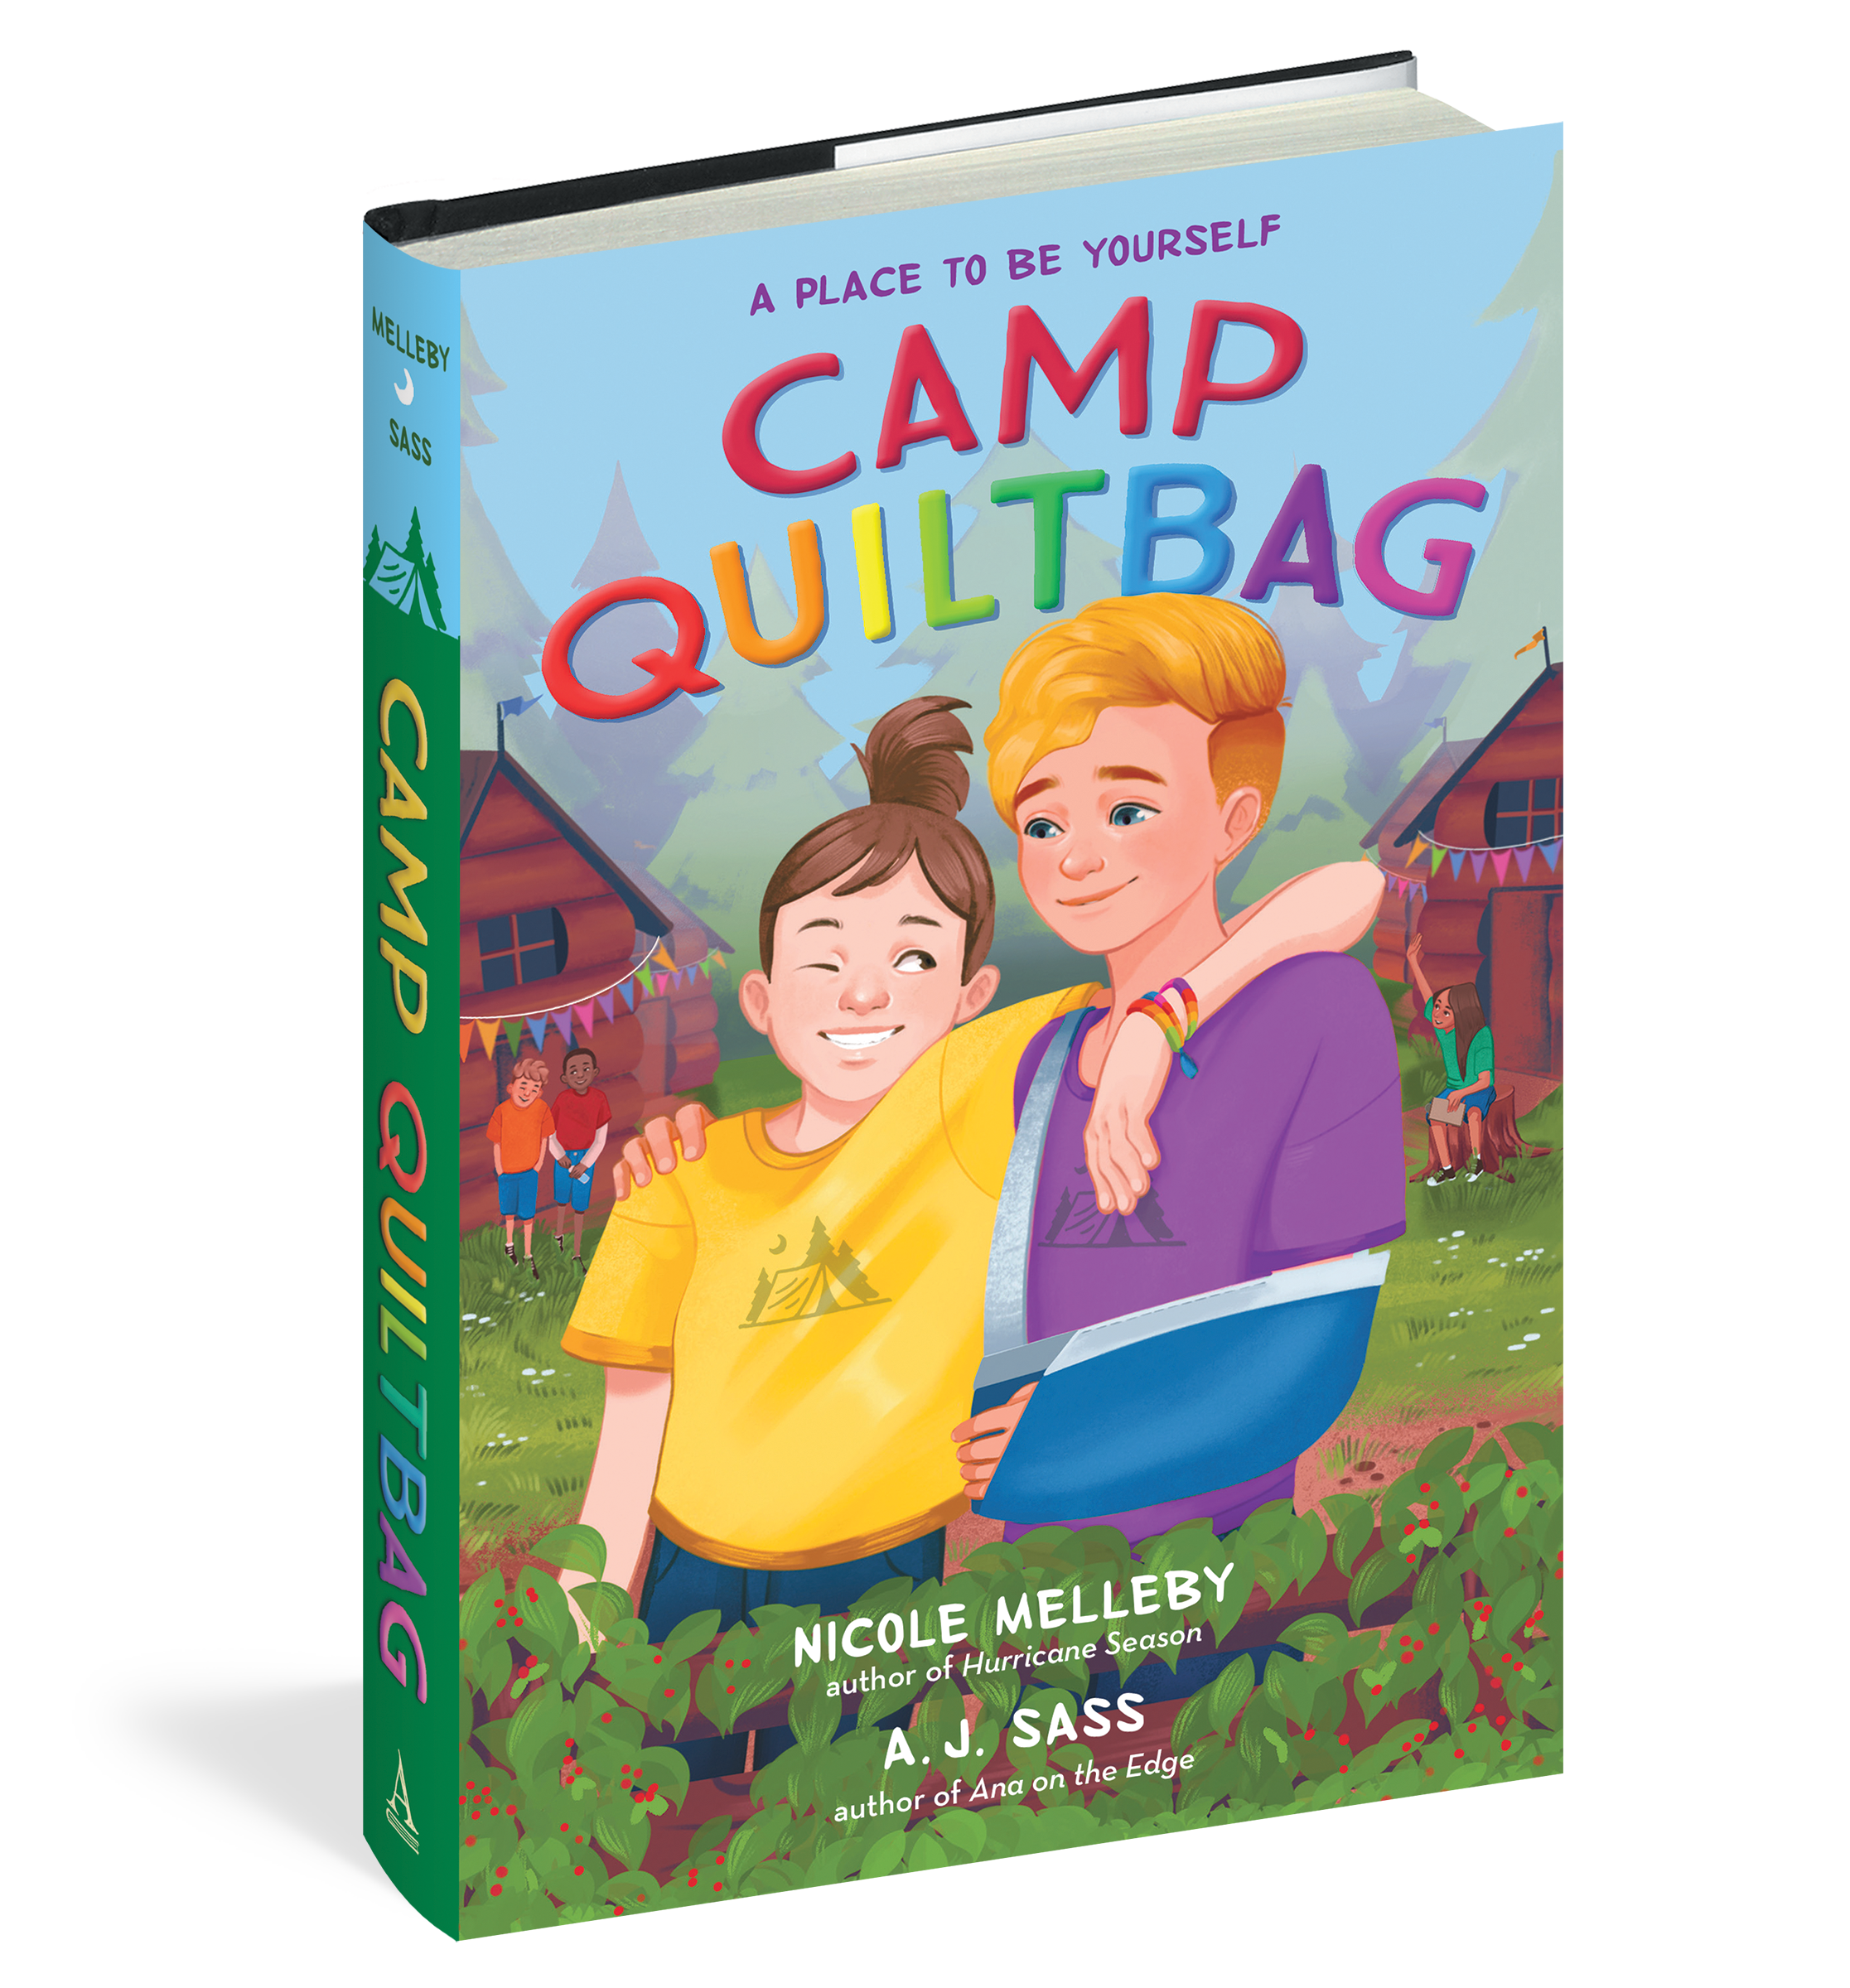 Spotlight on Camp QUILTBAG (Nicole Melleby and A. J. Sass), Excerpt Plus Giveaway! ~ US Only